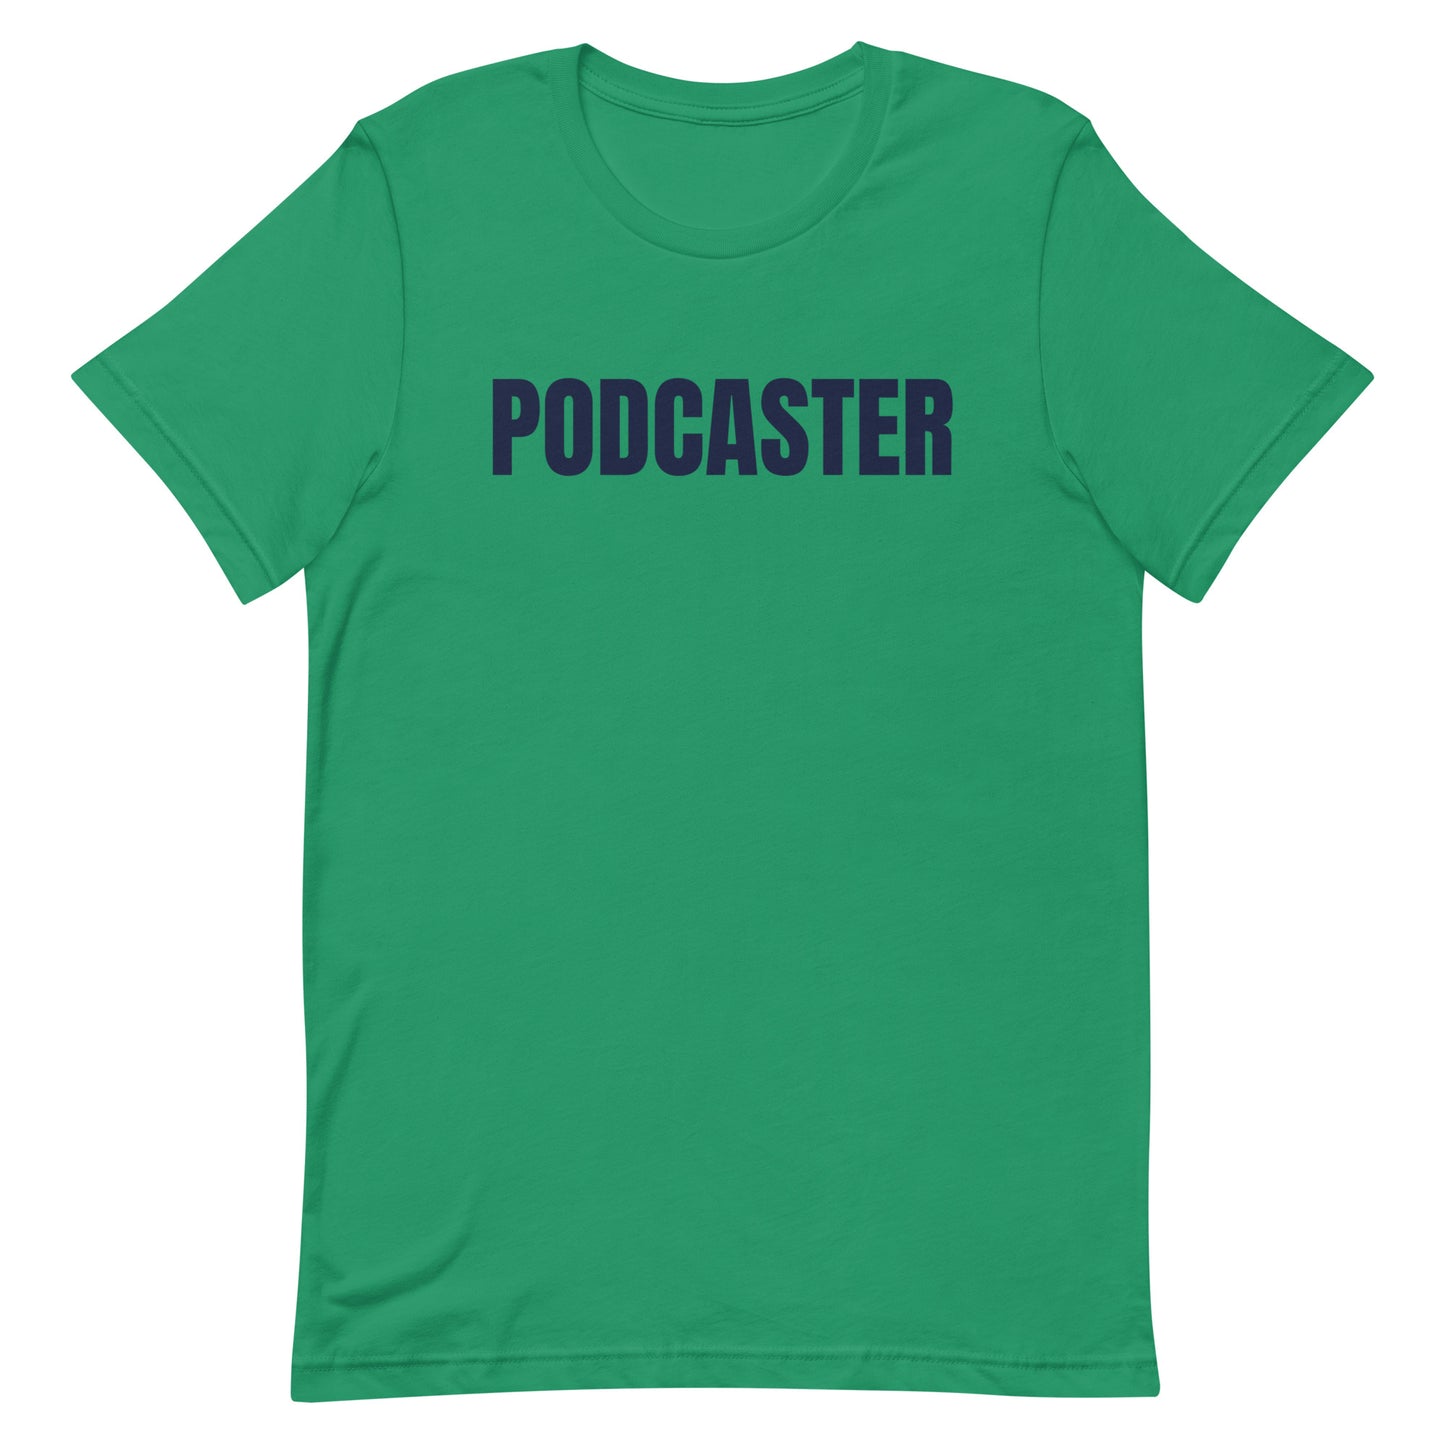 Podcaster Tee